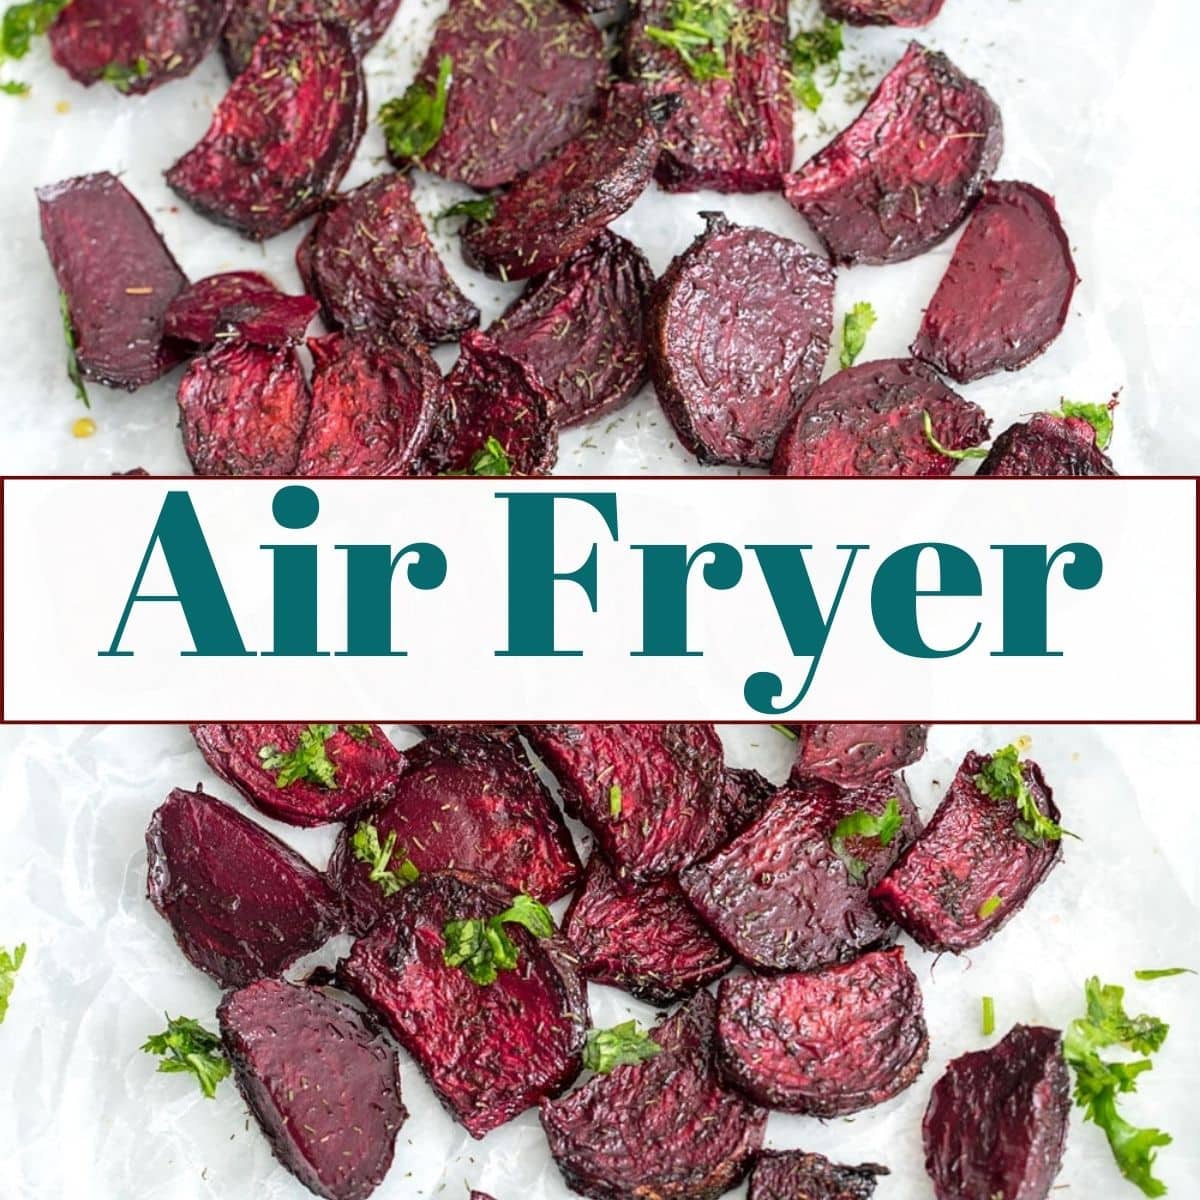 beets image in the background with title of "Air Fryer" written on it.